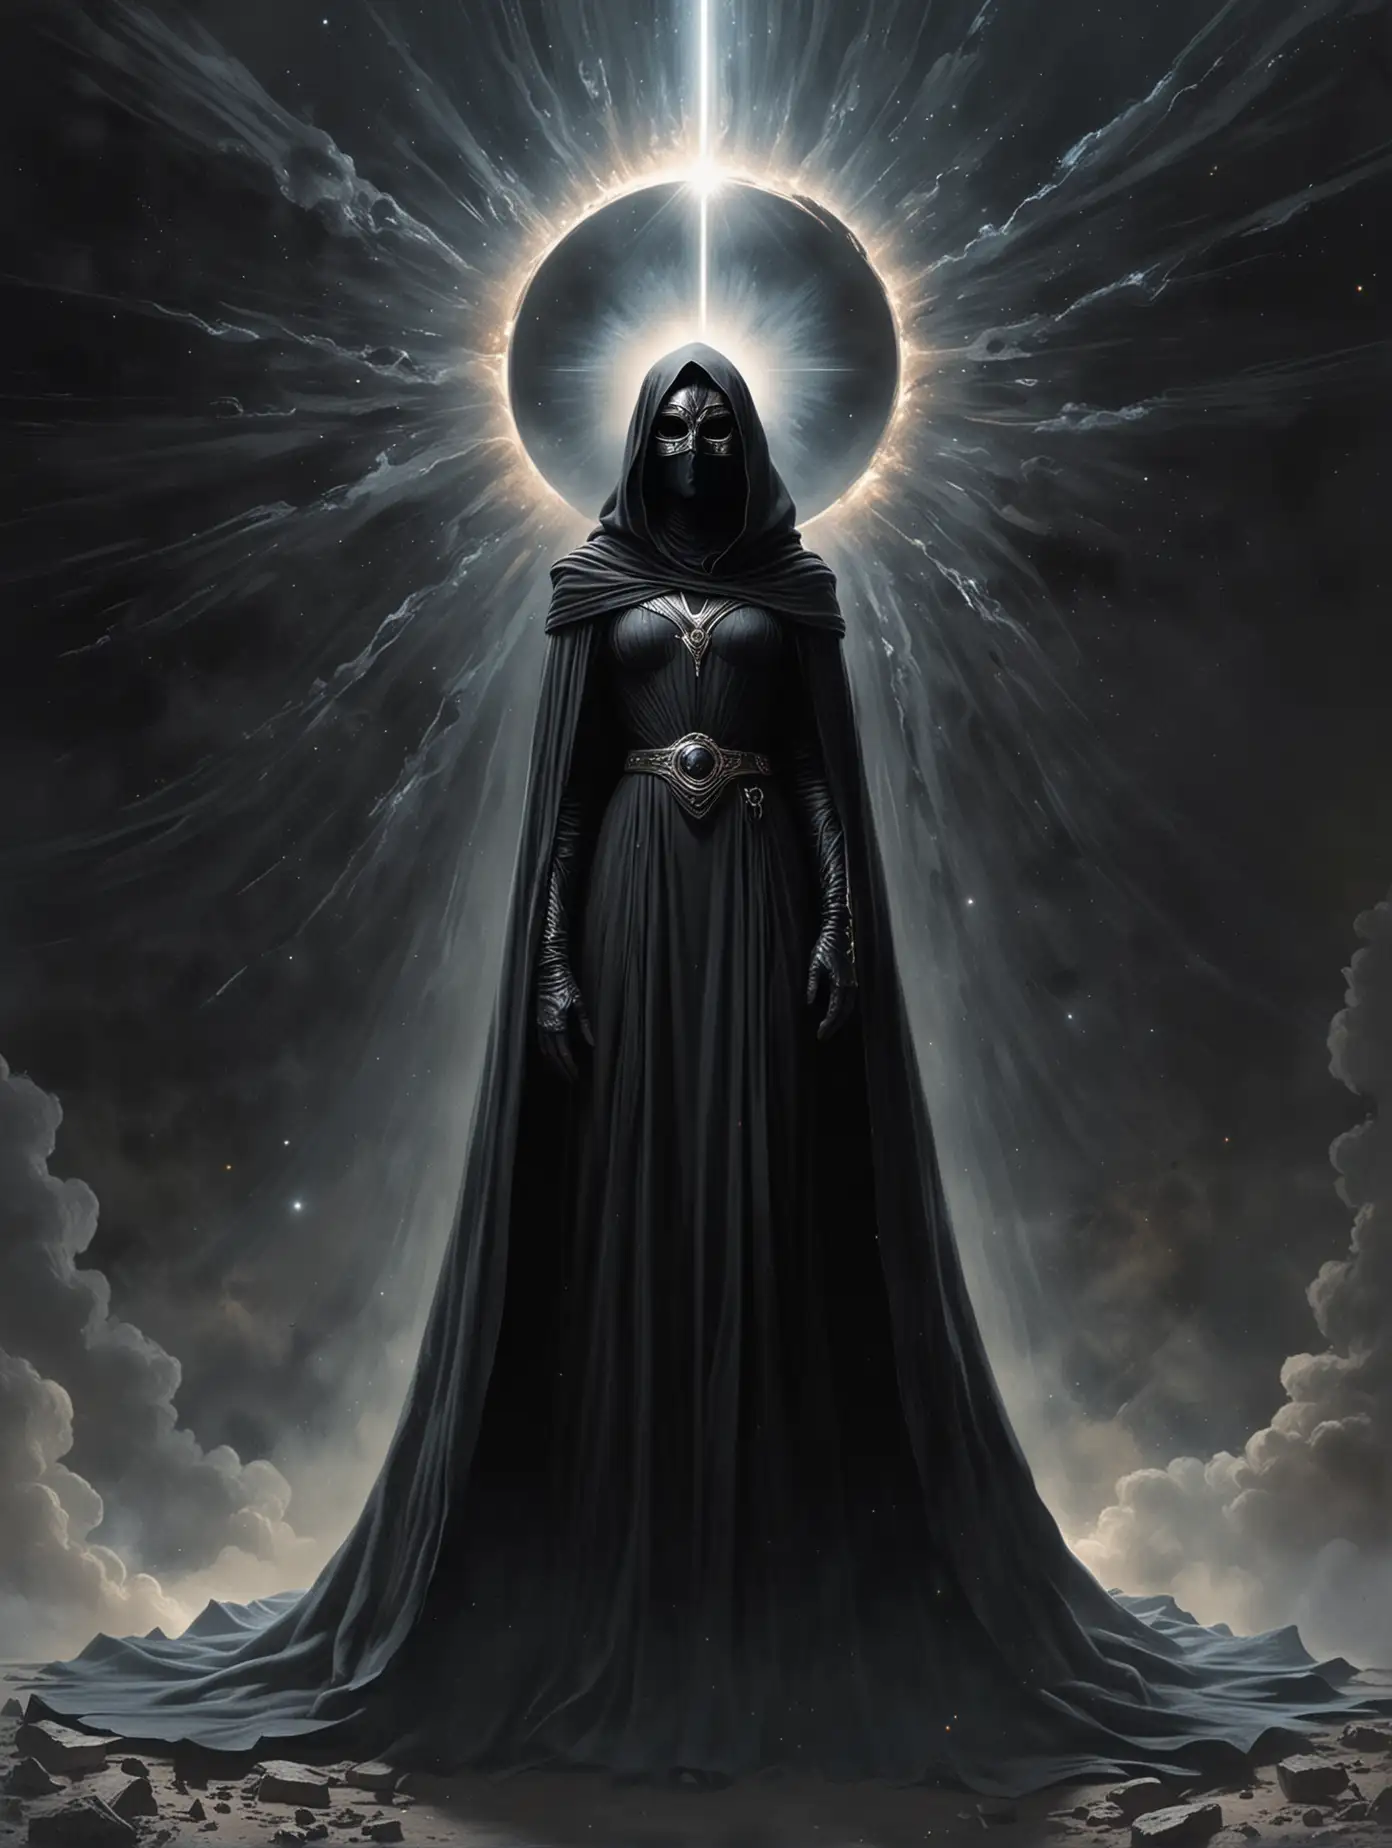 Sister-Gesserit-Guardian-of-the-Abyss-Enigmatic-Figure-at-the-Edge-of-a-Black-Hole